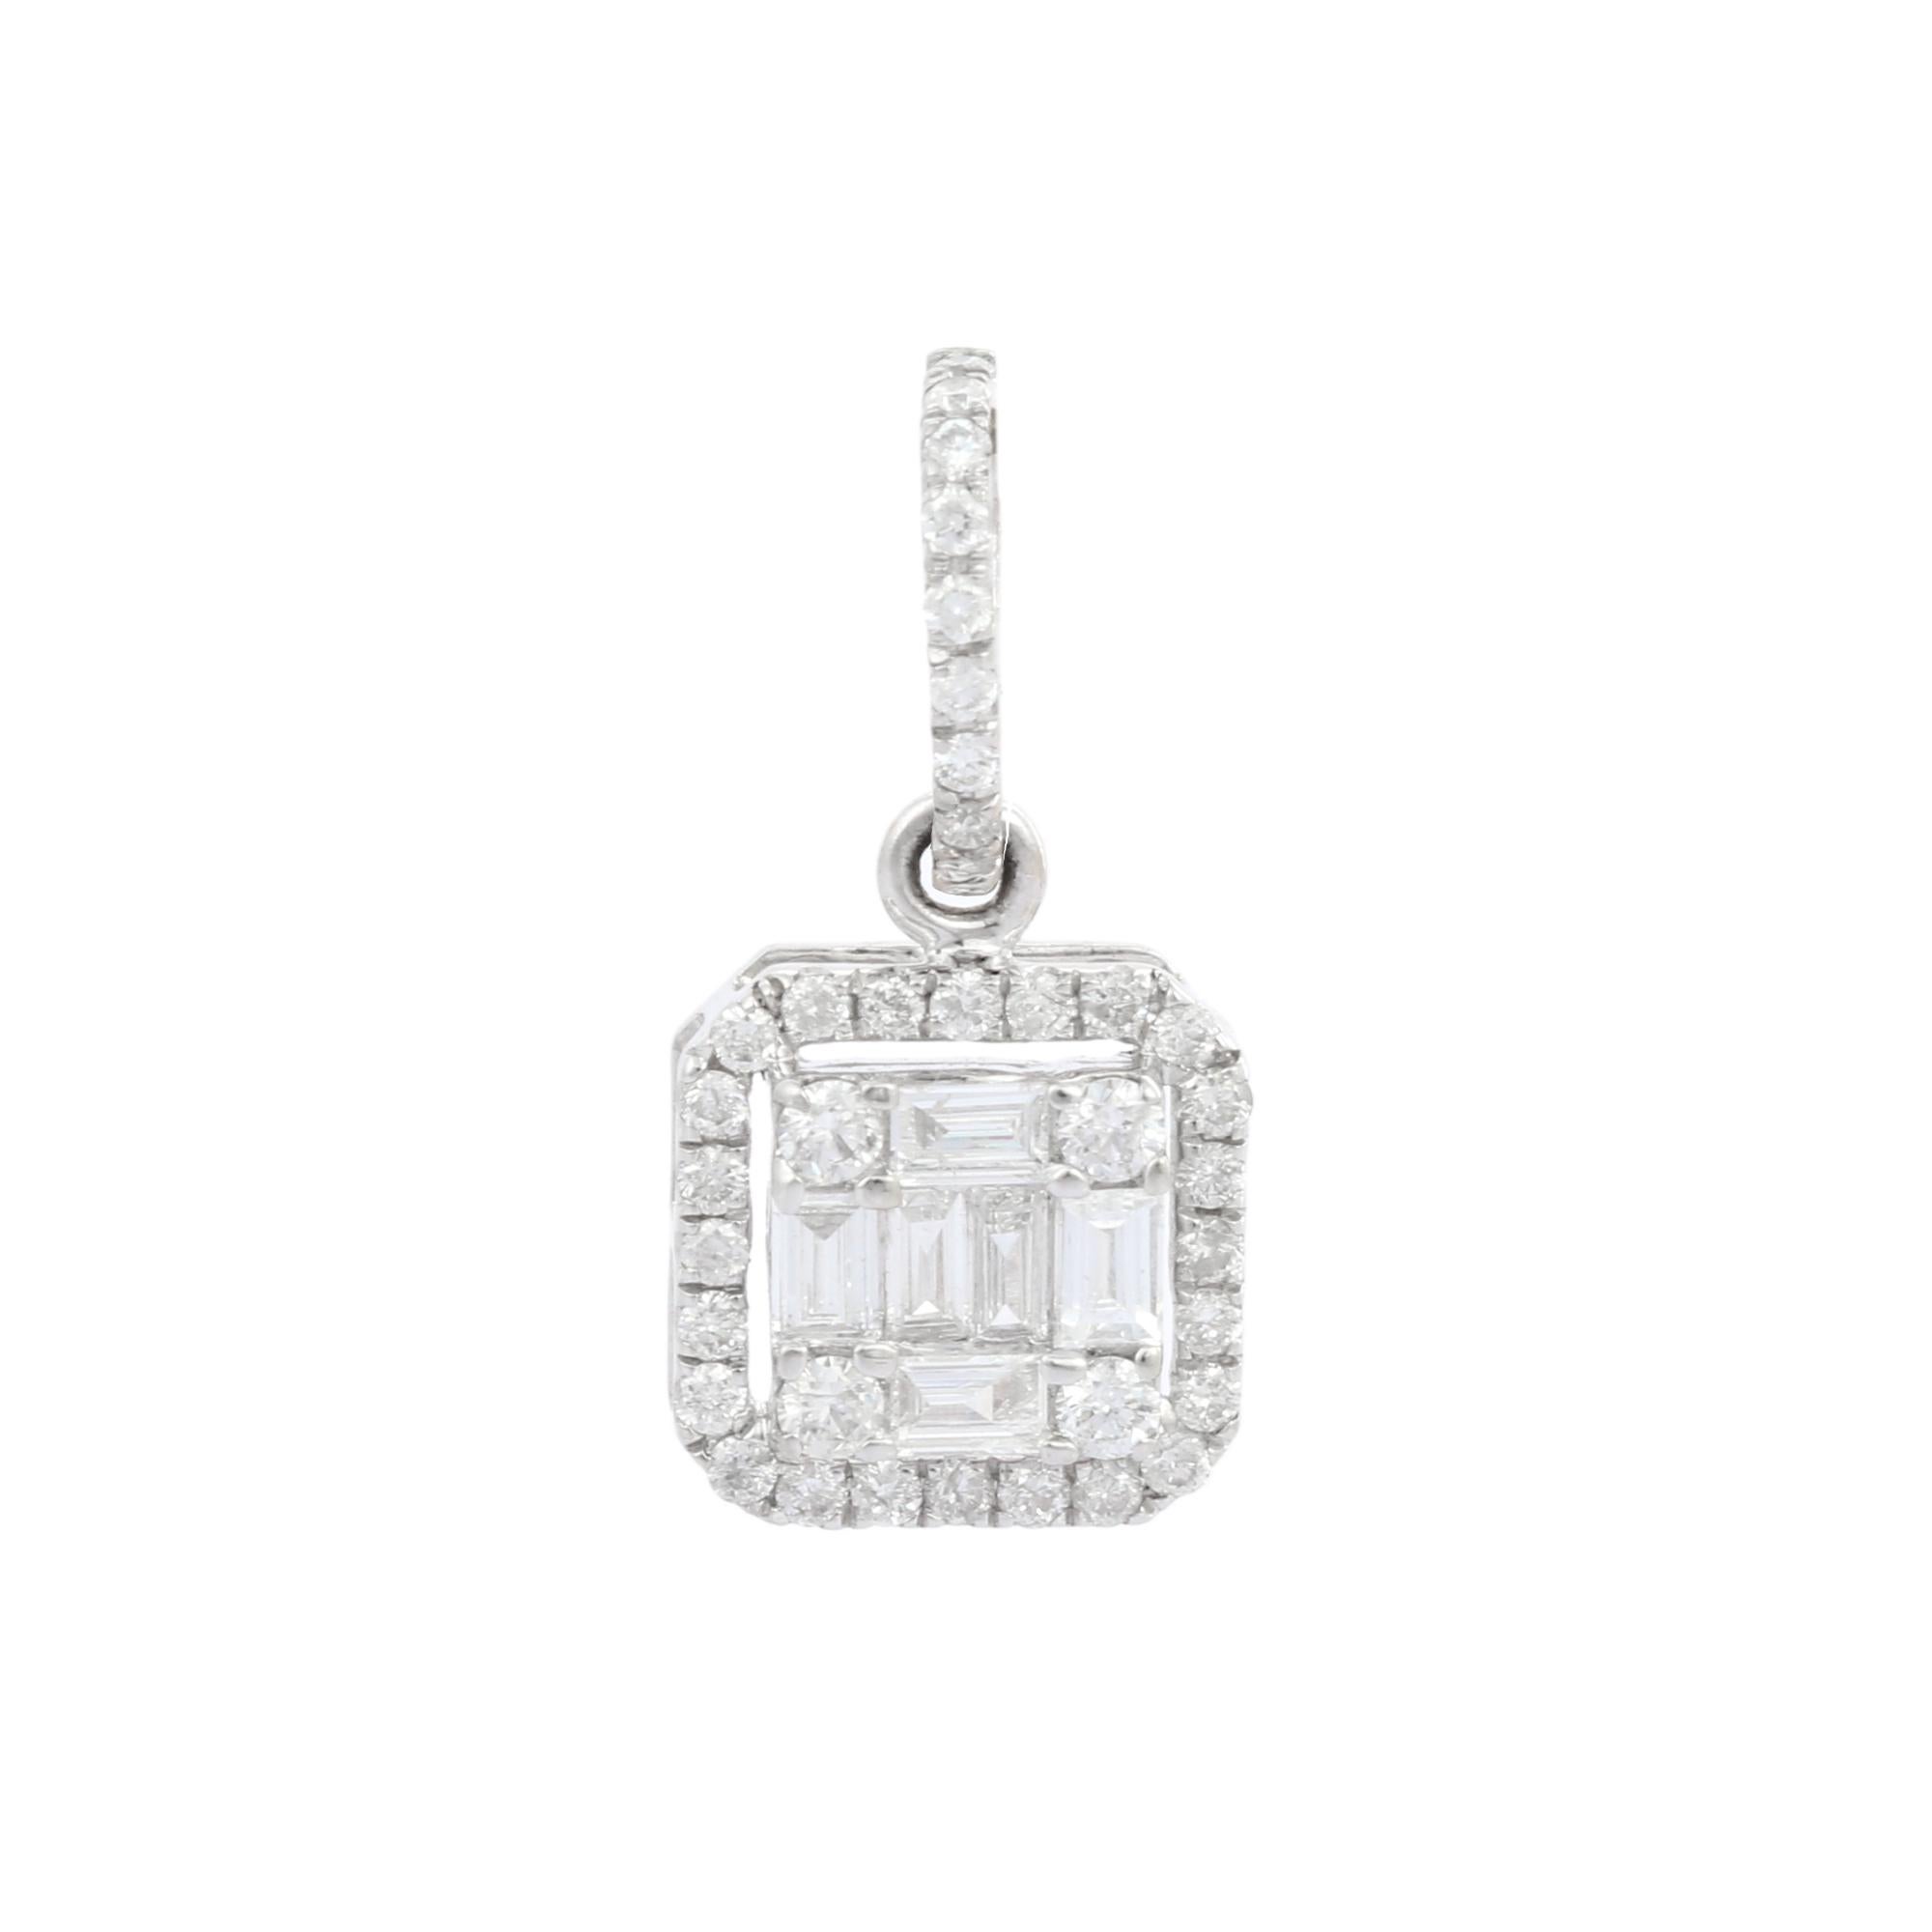 Romantic Handcrafted Diamond Pendant Necklace in 14K White Gold with Mix Cut Diamonds  For Sale